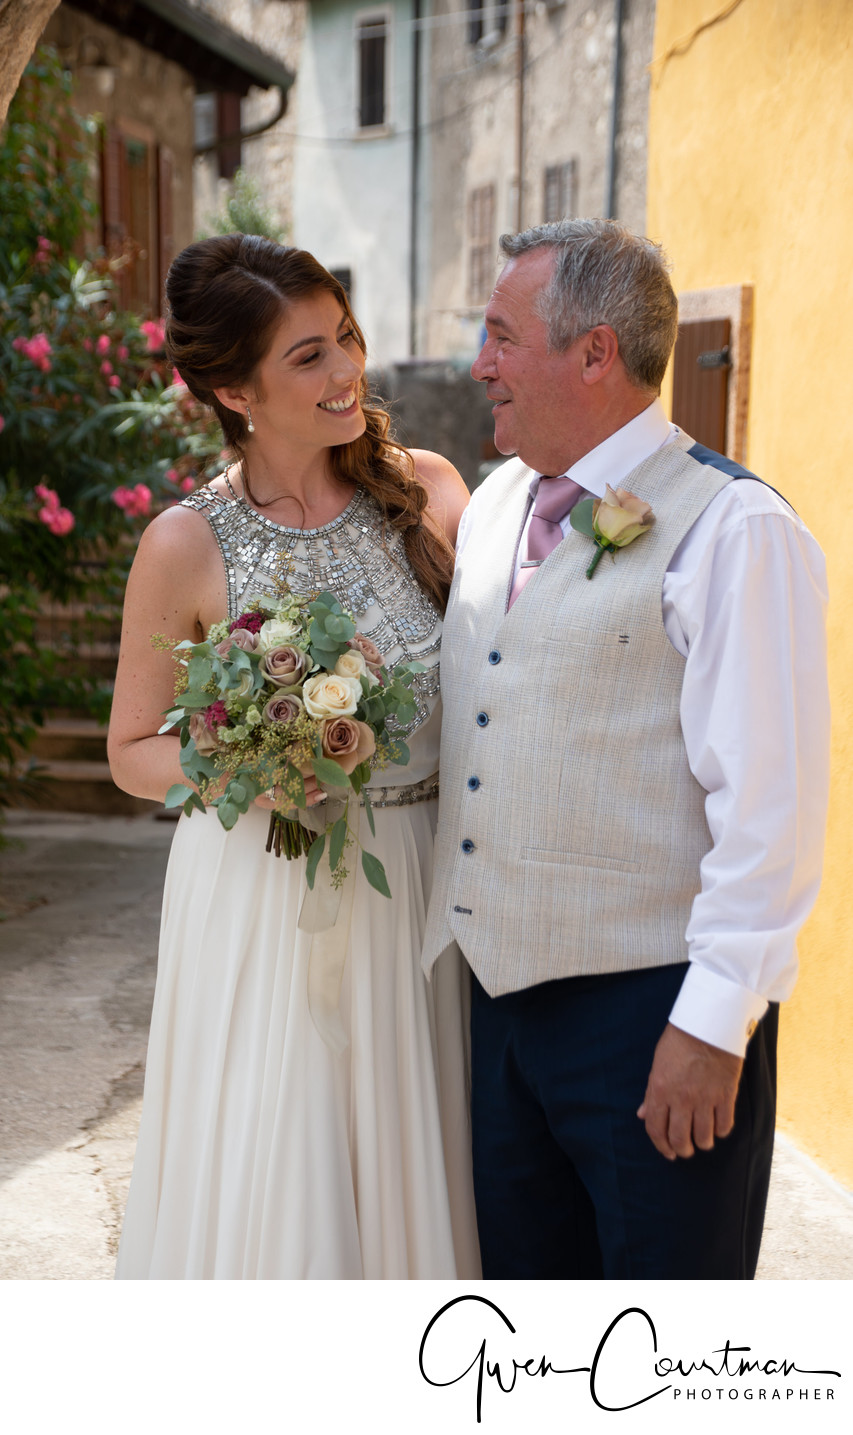 Gemma and Dad, Malcesine, Italy